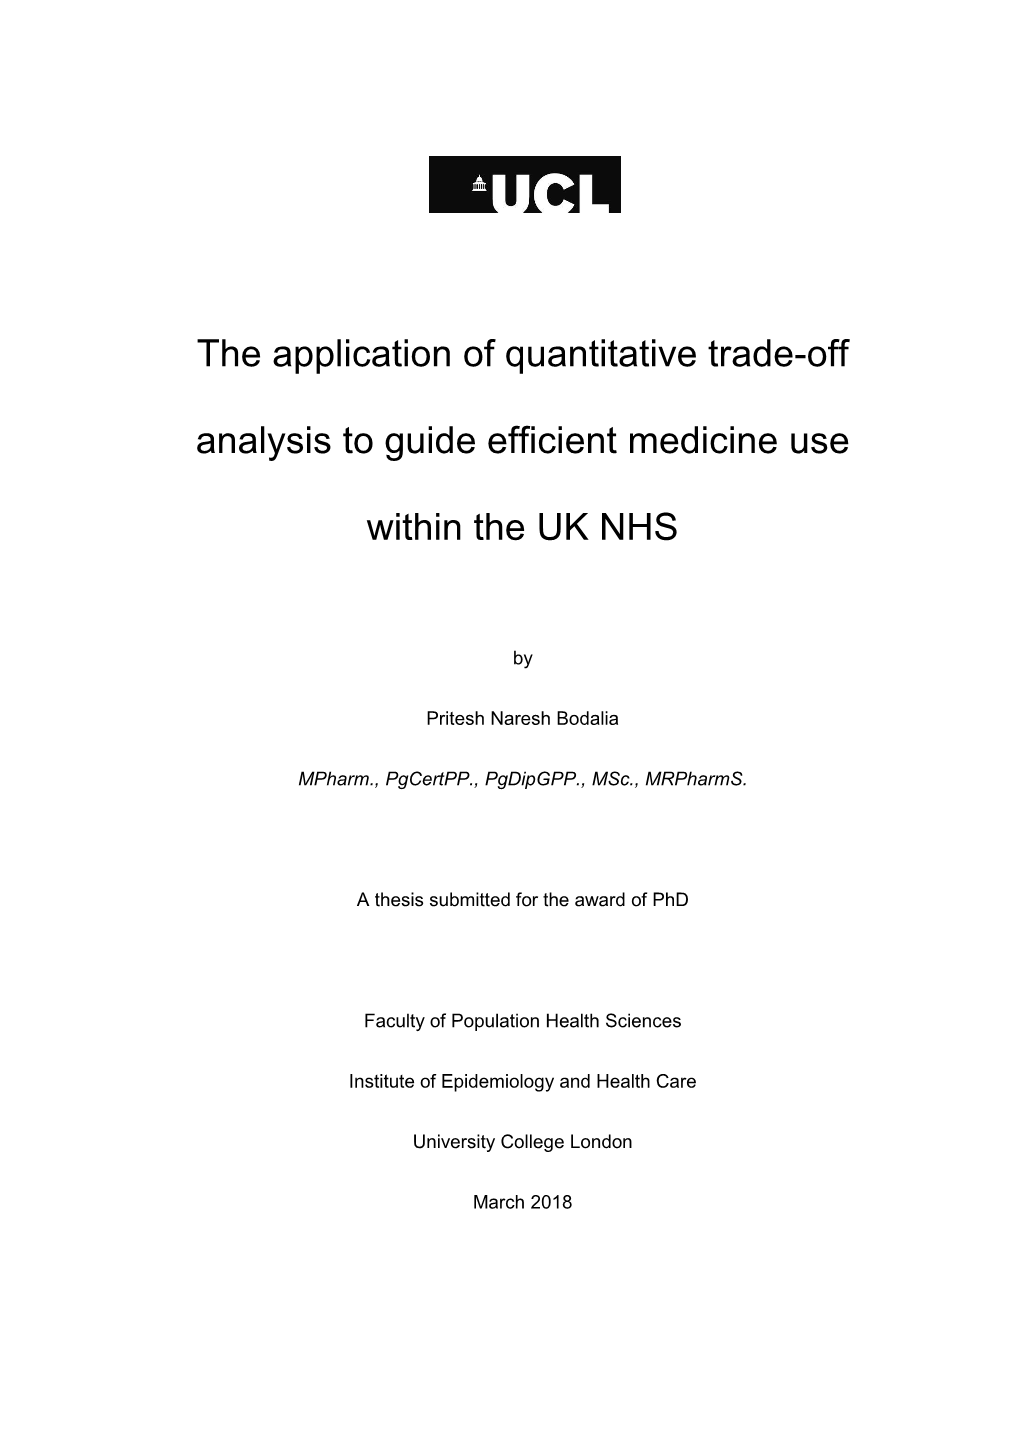 The Application of Quantitative Trade-Off Analysis to Guide Efficient Medicine Use